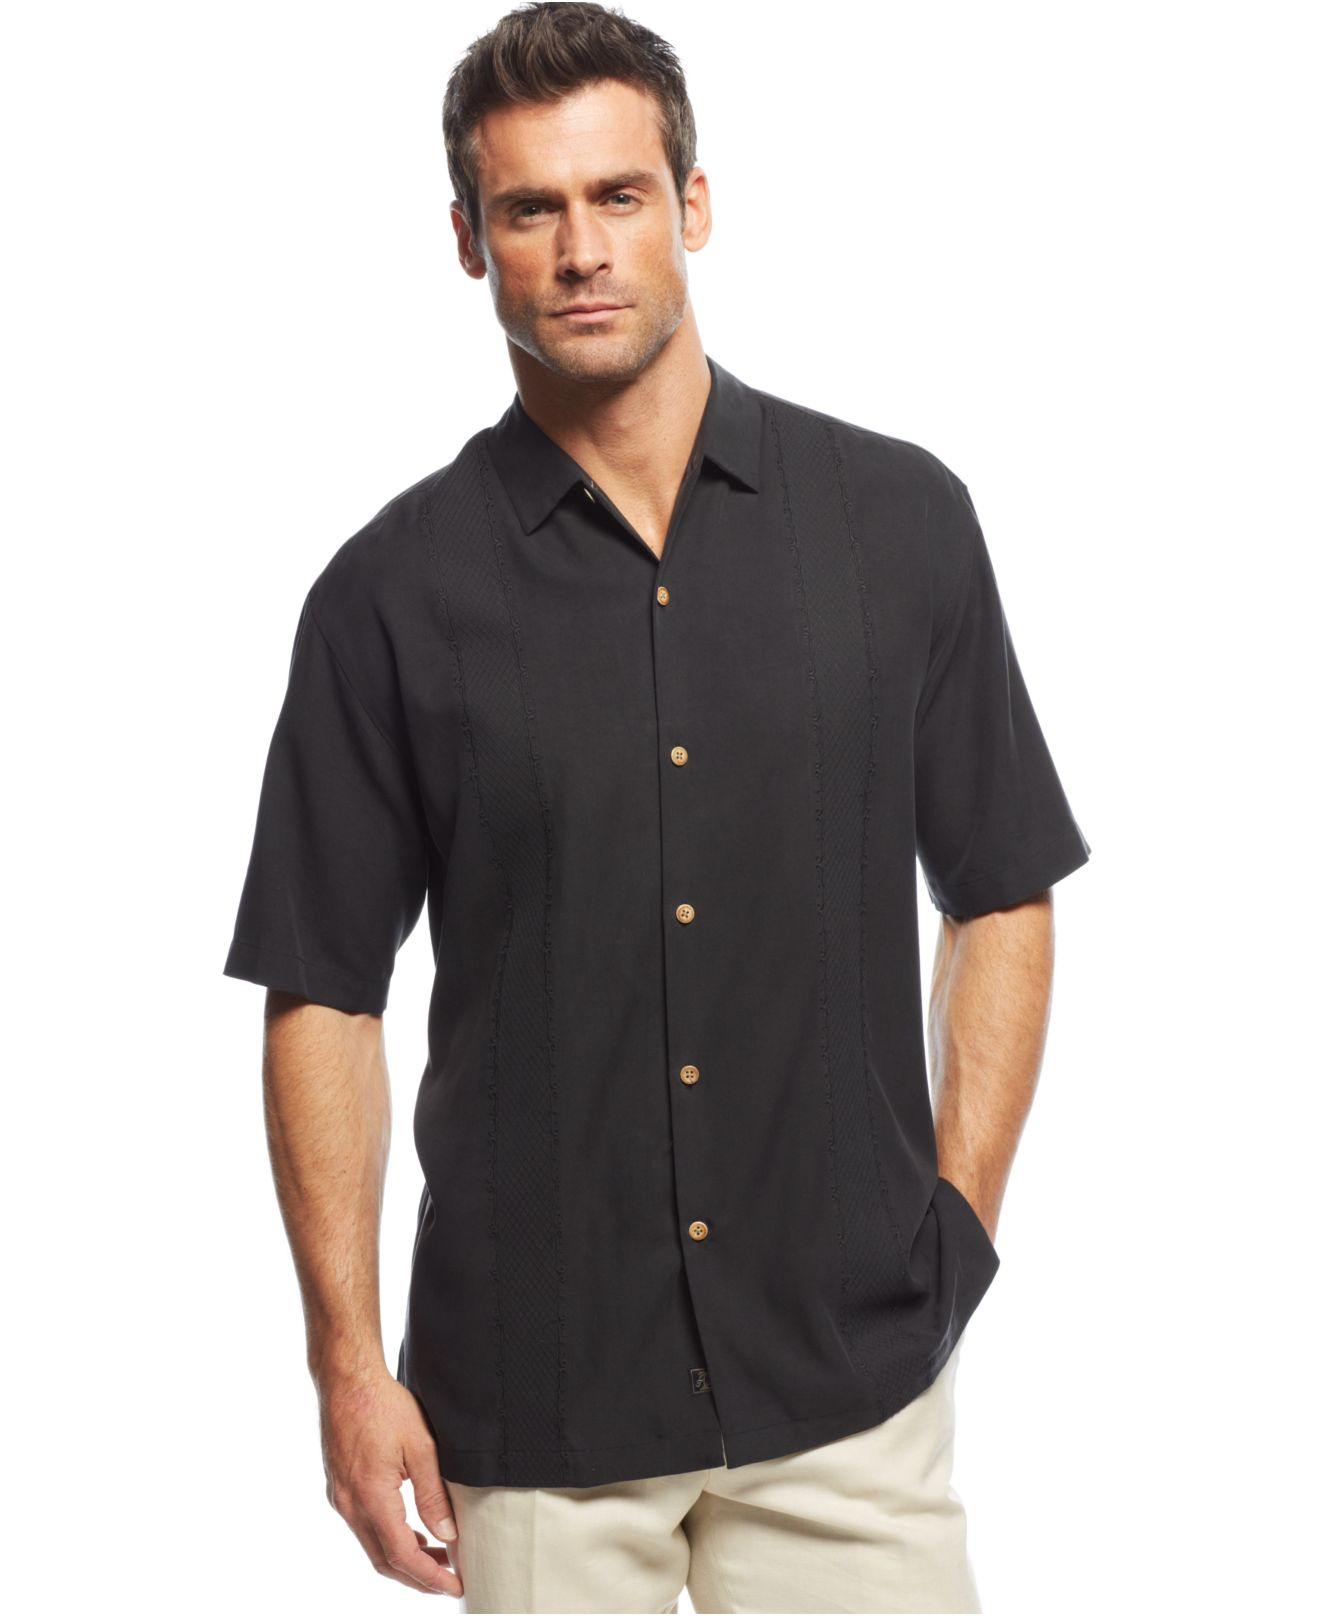 Tommy Bahama Black Tropical Oaces Shirt Product 1 27178326 1 771595492 Normal 